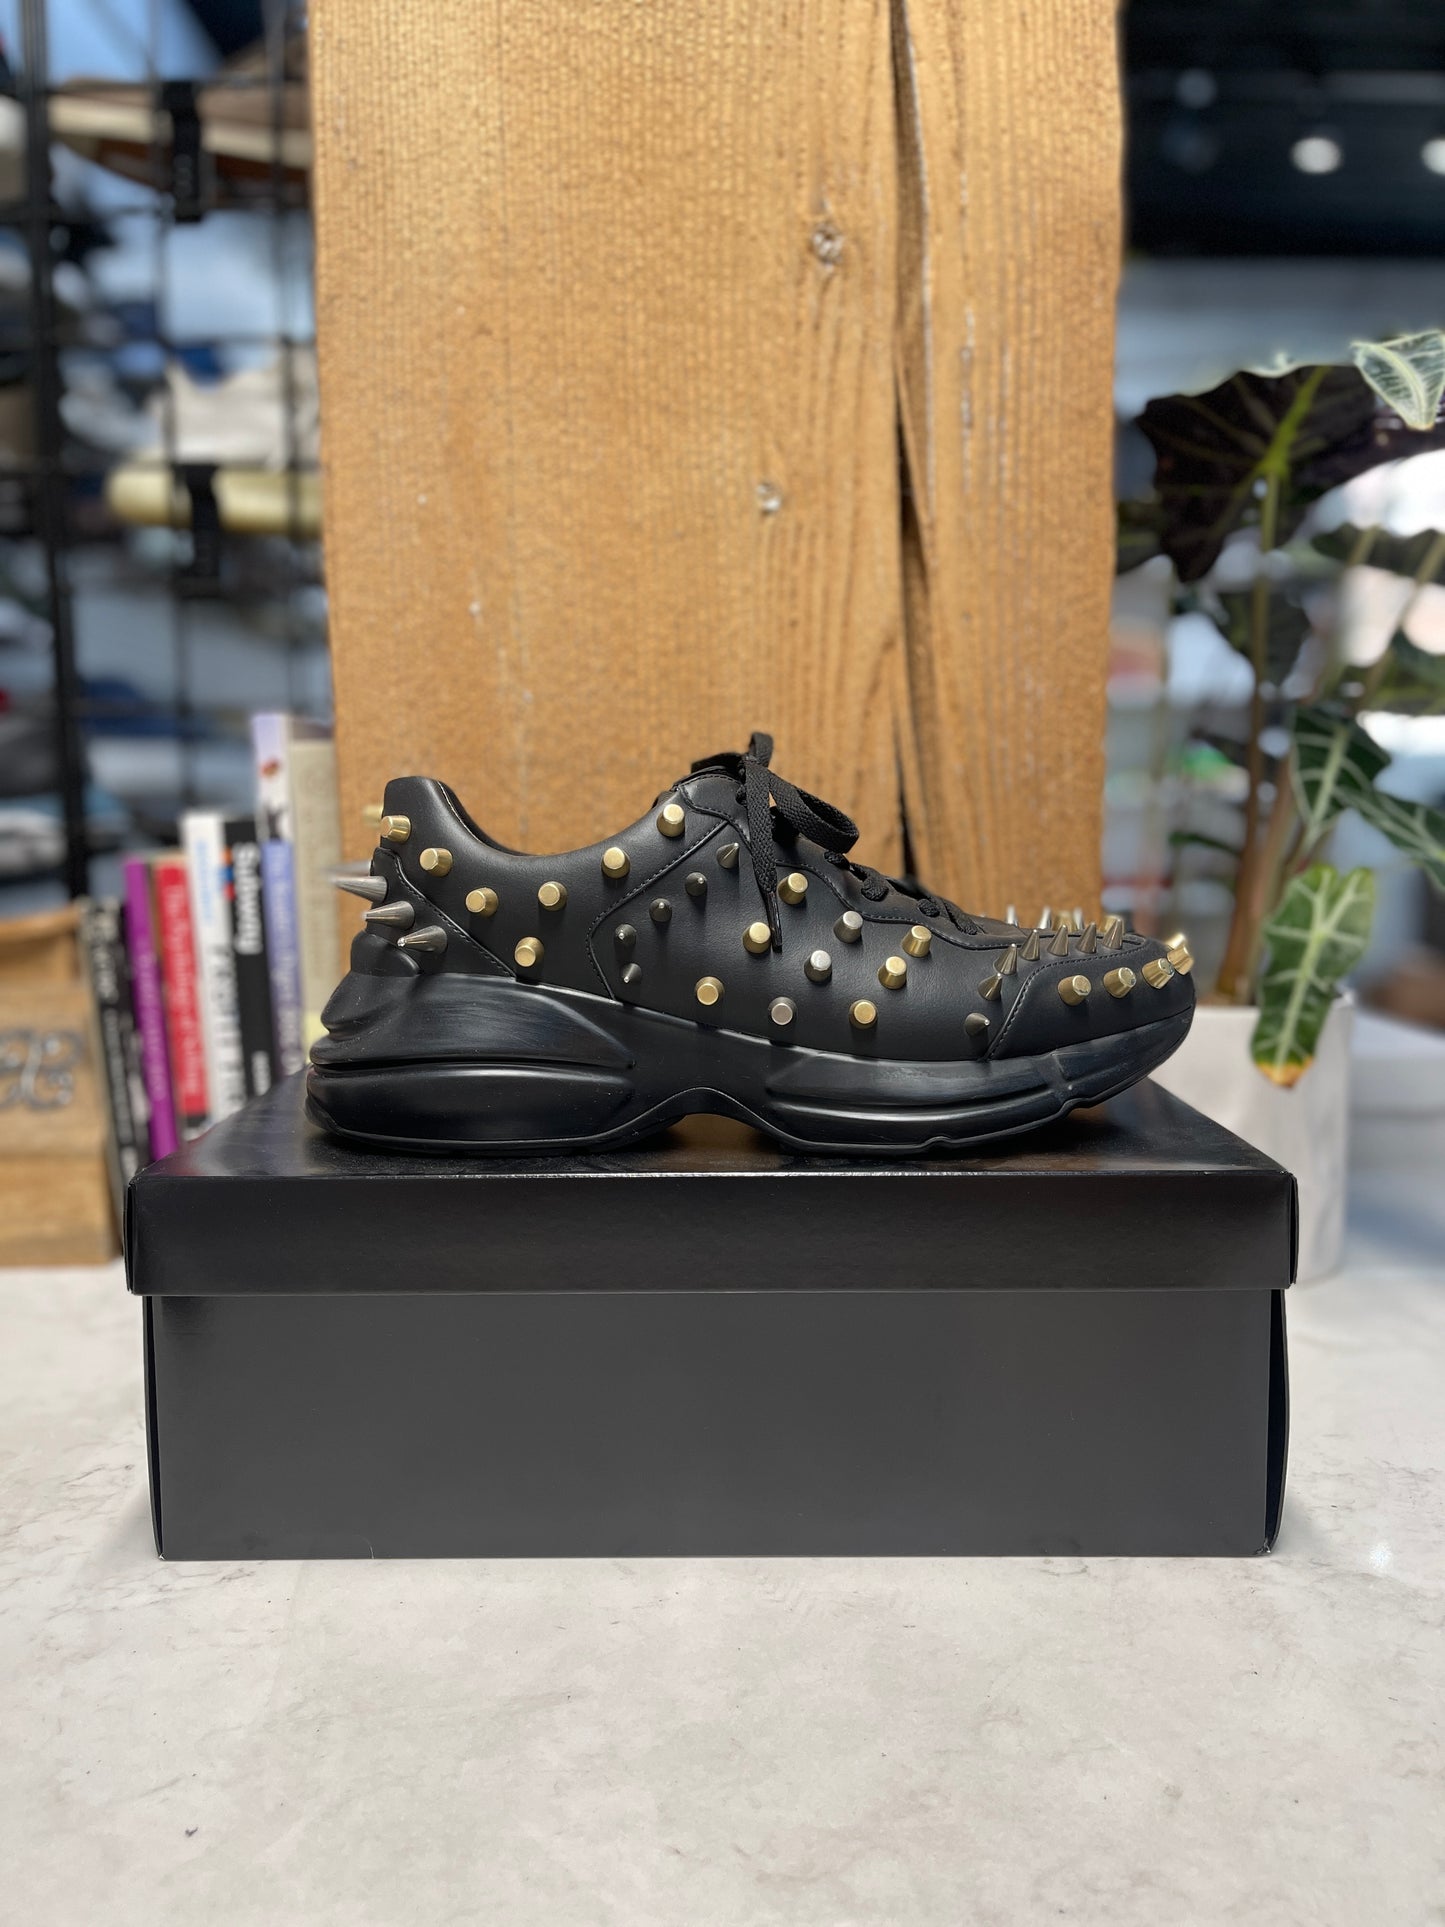 Gucci Rhyton Studded Leather Sneakers (Size 11)